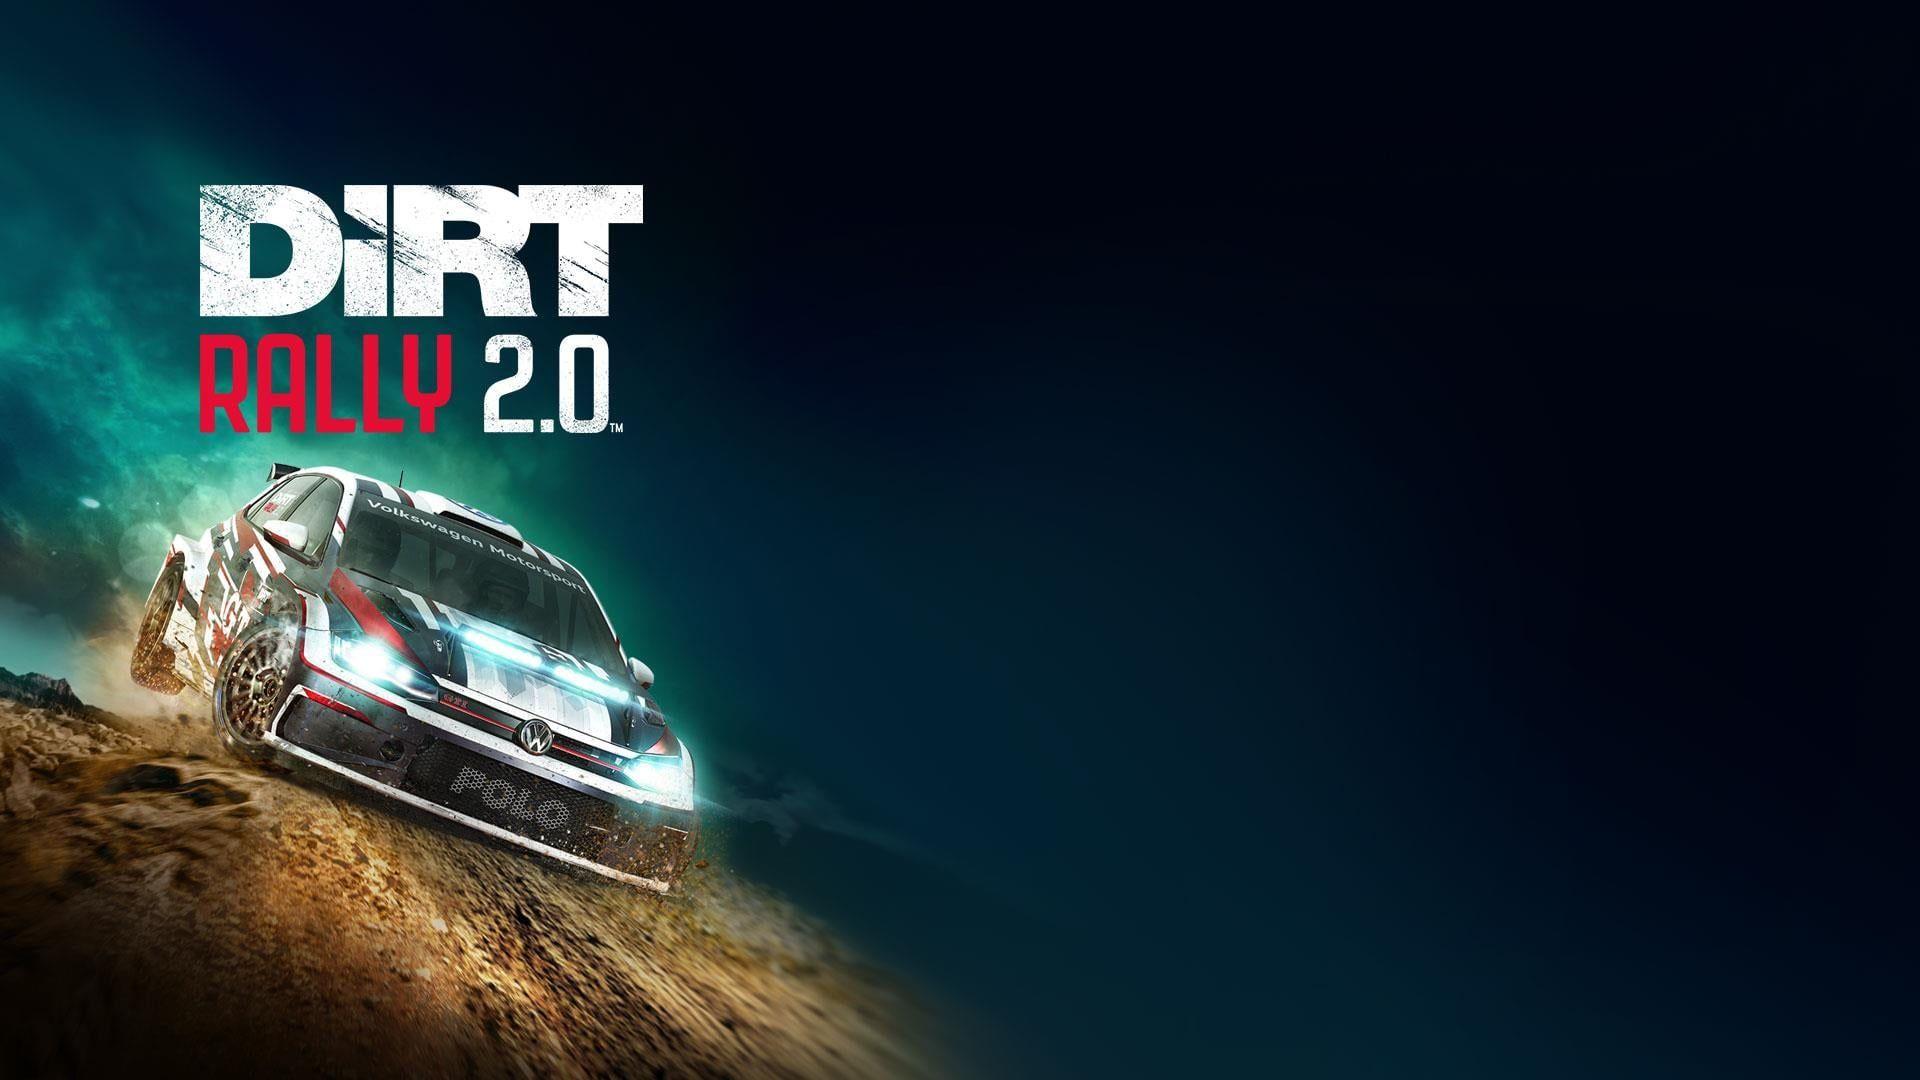 DiRT Rally 2.0 Finally Confirmed And Announced By Codemasters